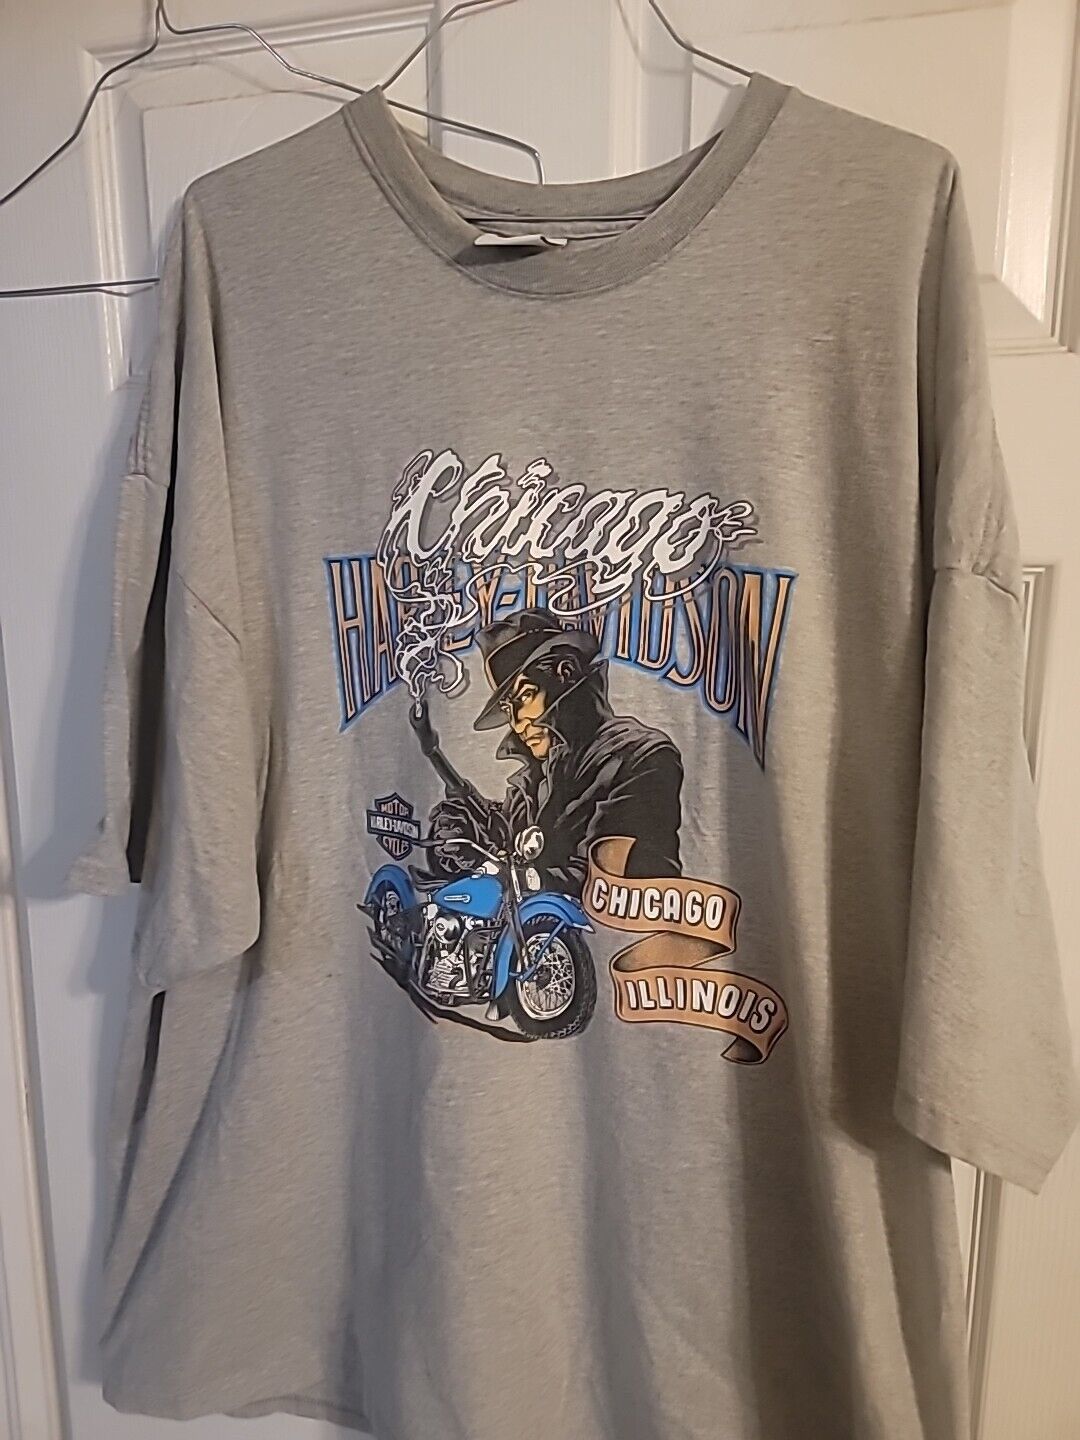 Harley Davidson Mobster Shirt 5XL Extremely Rare Vintage 2005 Chicago Illinois 